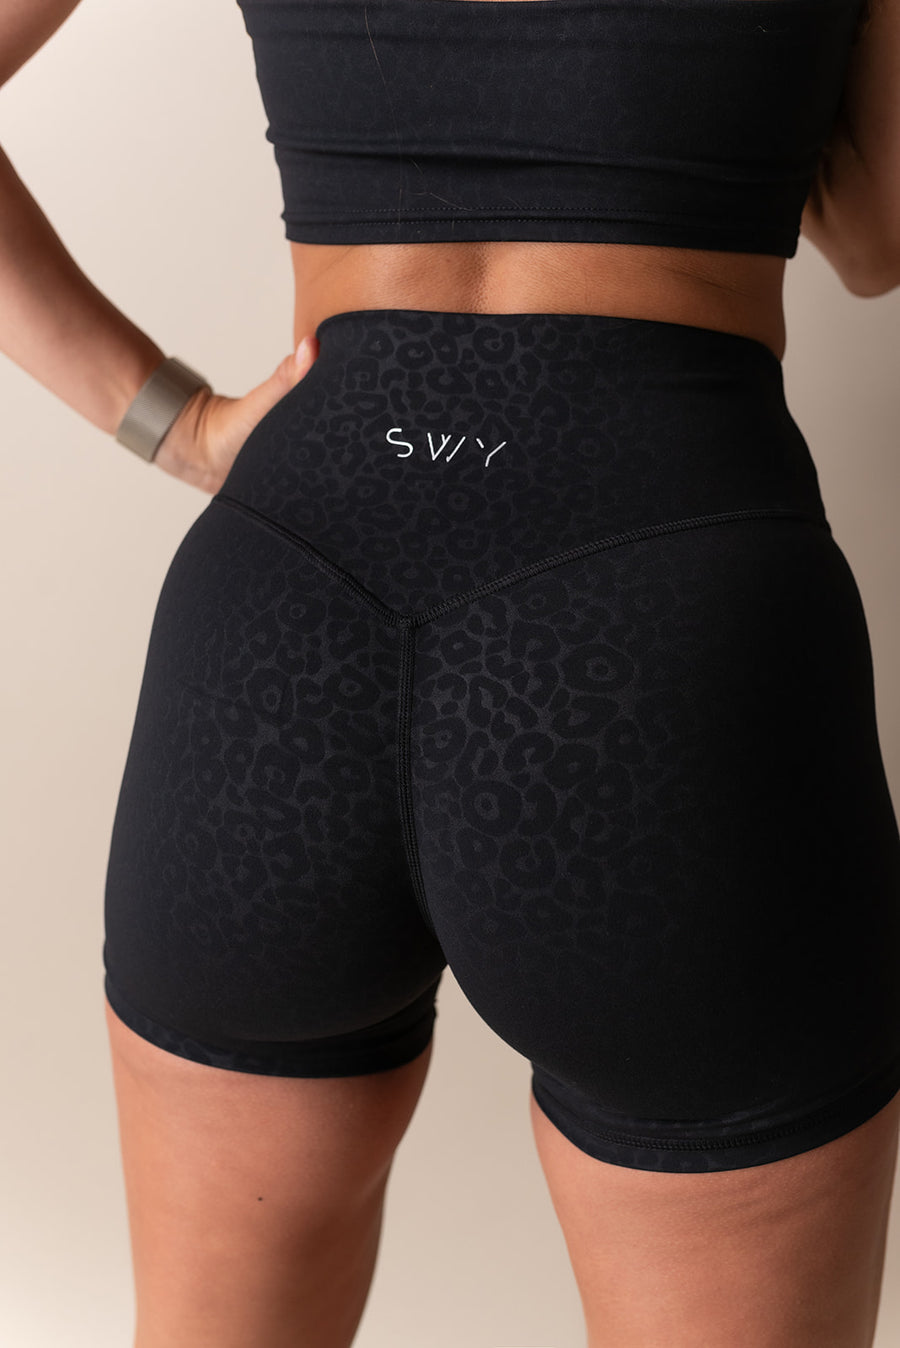 Swy black training short with leopard motive with hidden pocket in soft and stretchy material 